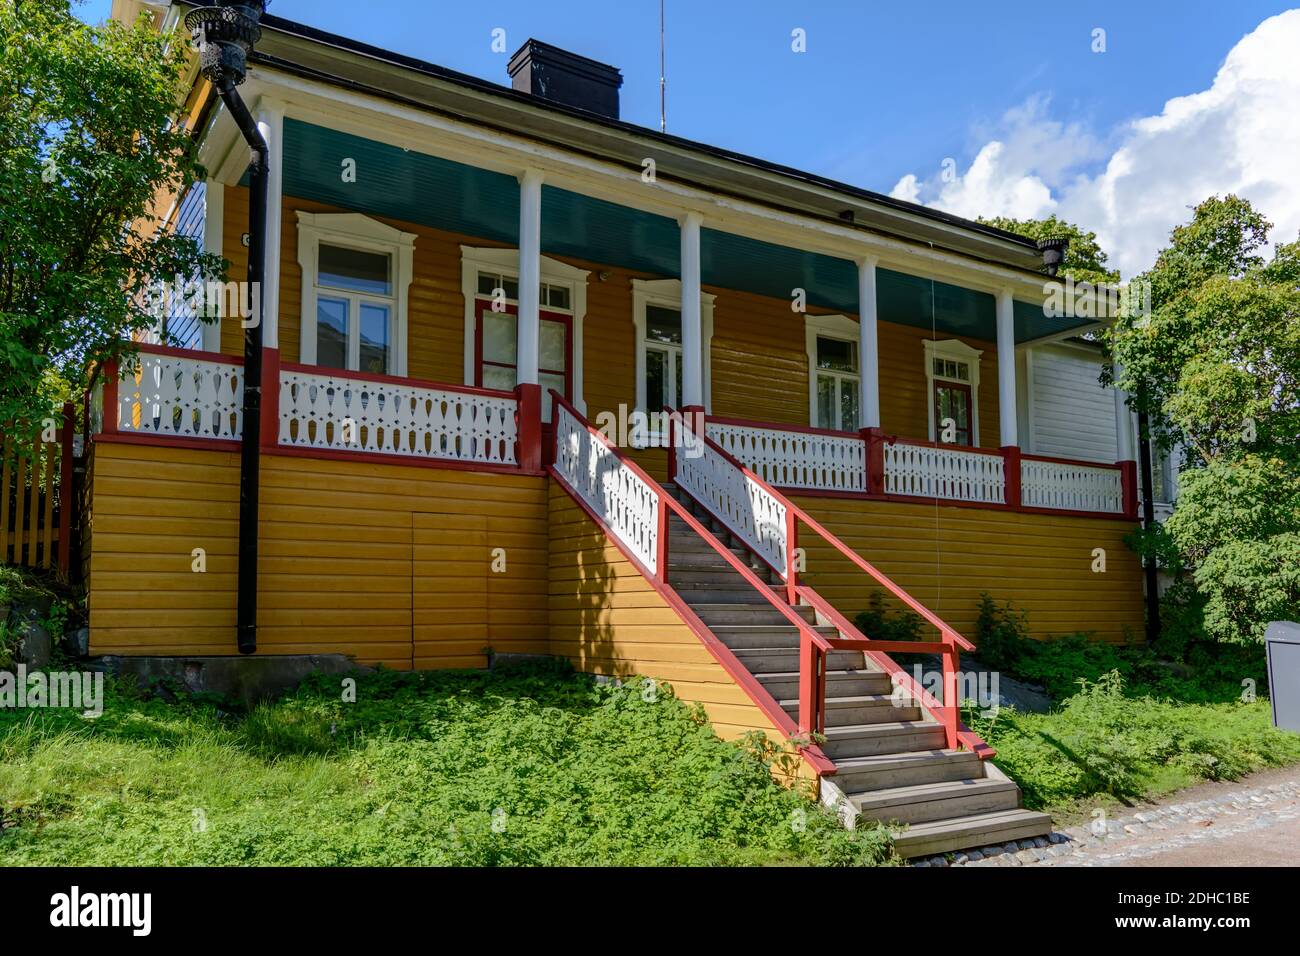 Yellow wooden house in Russian trading block in Suomenlinna fortress, with columned veranda, high entrance steps and stone base, as well as ornamental Stock Photo